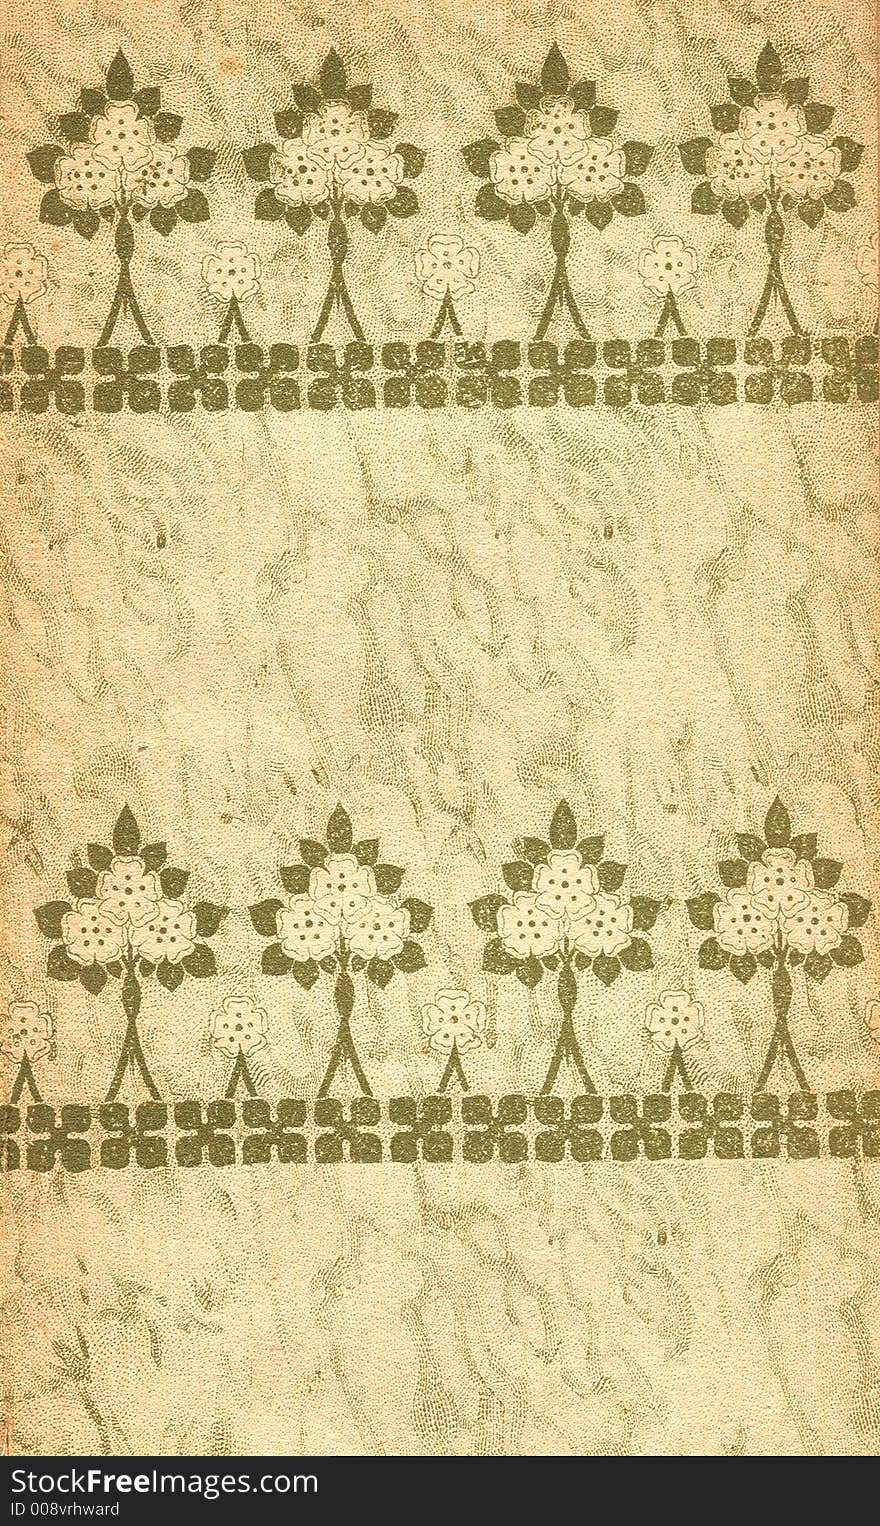 Antique cover paper from 1908.